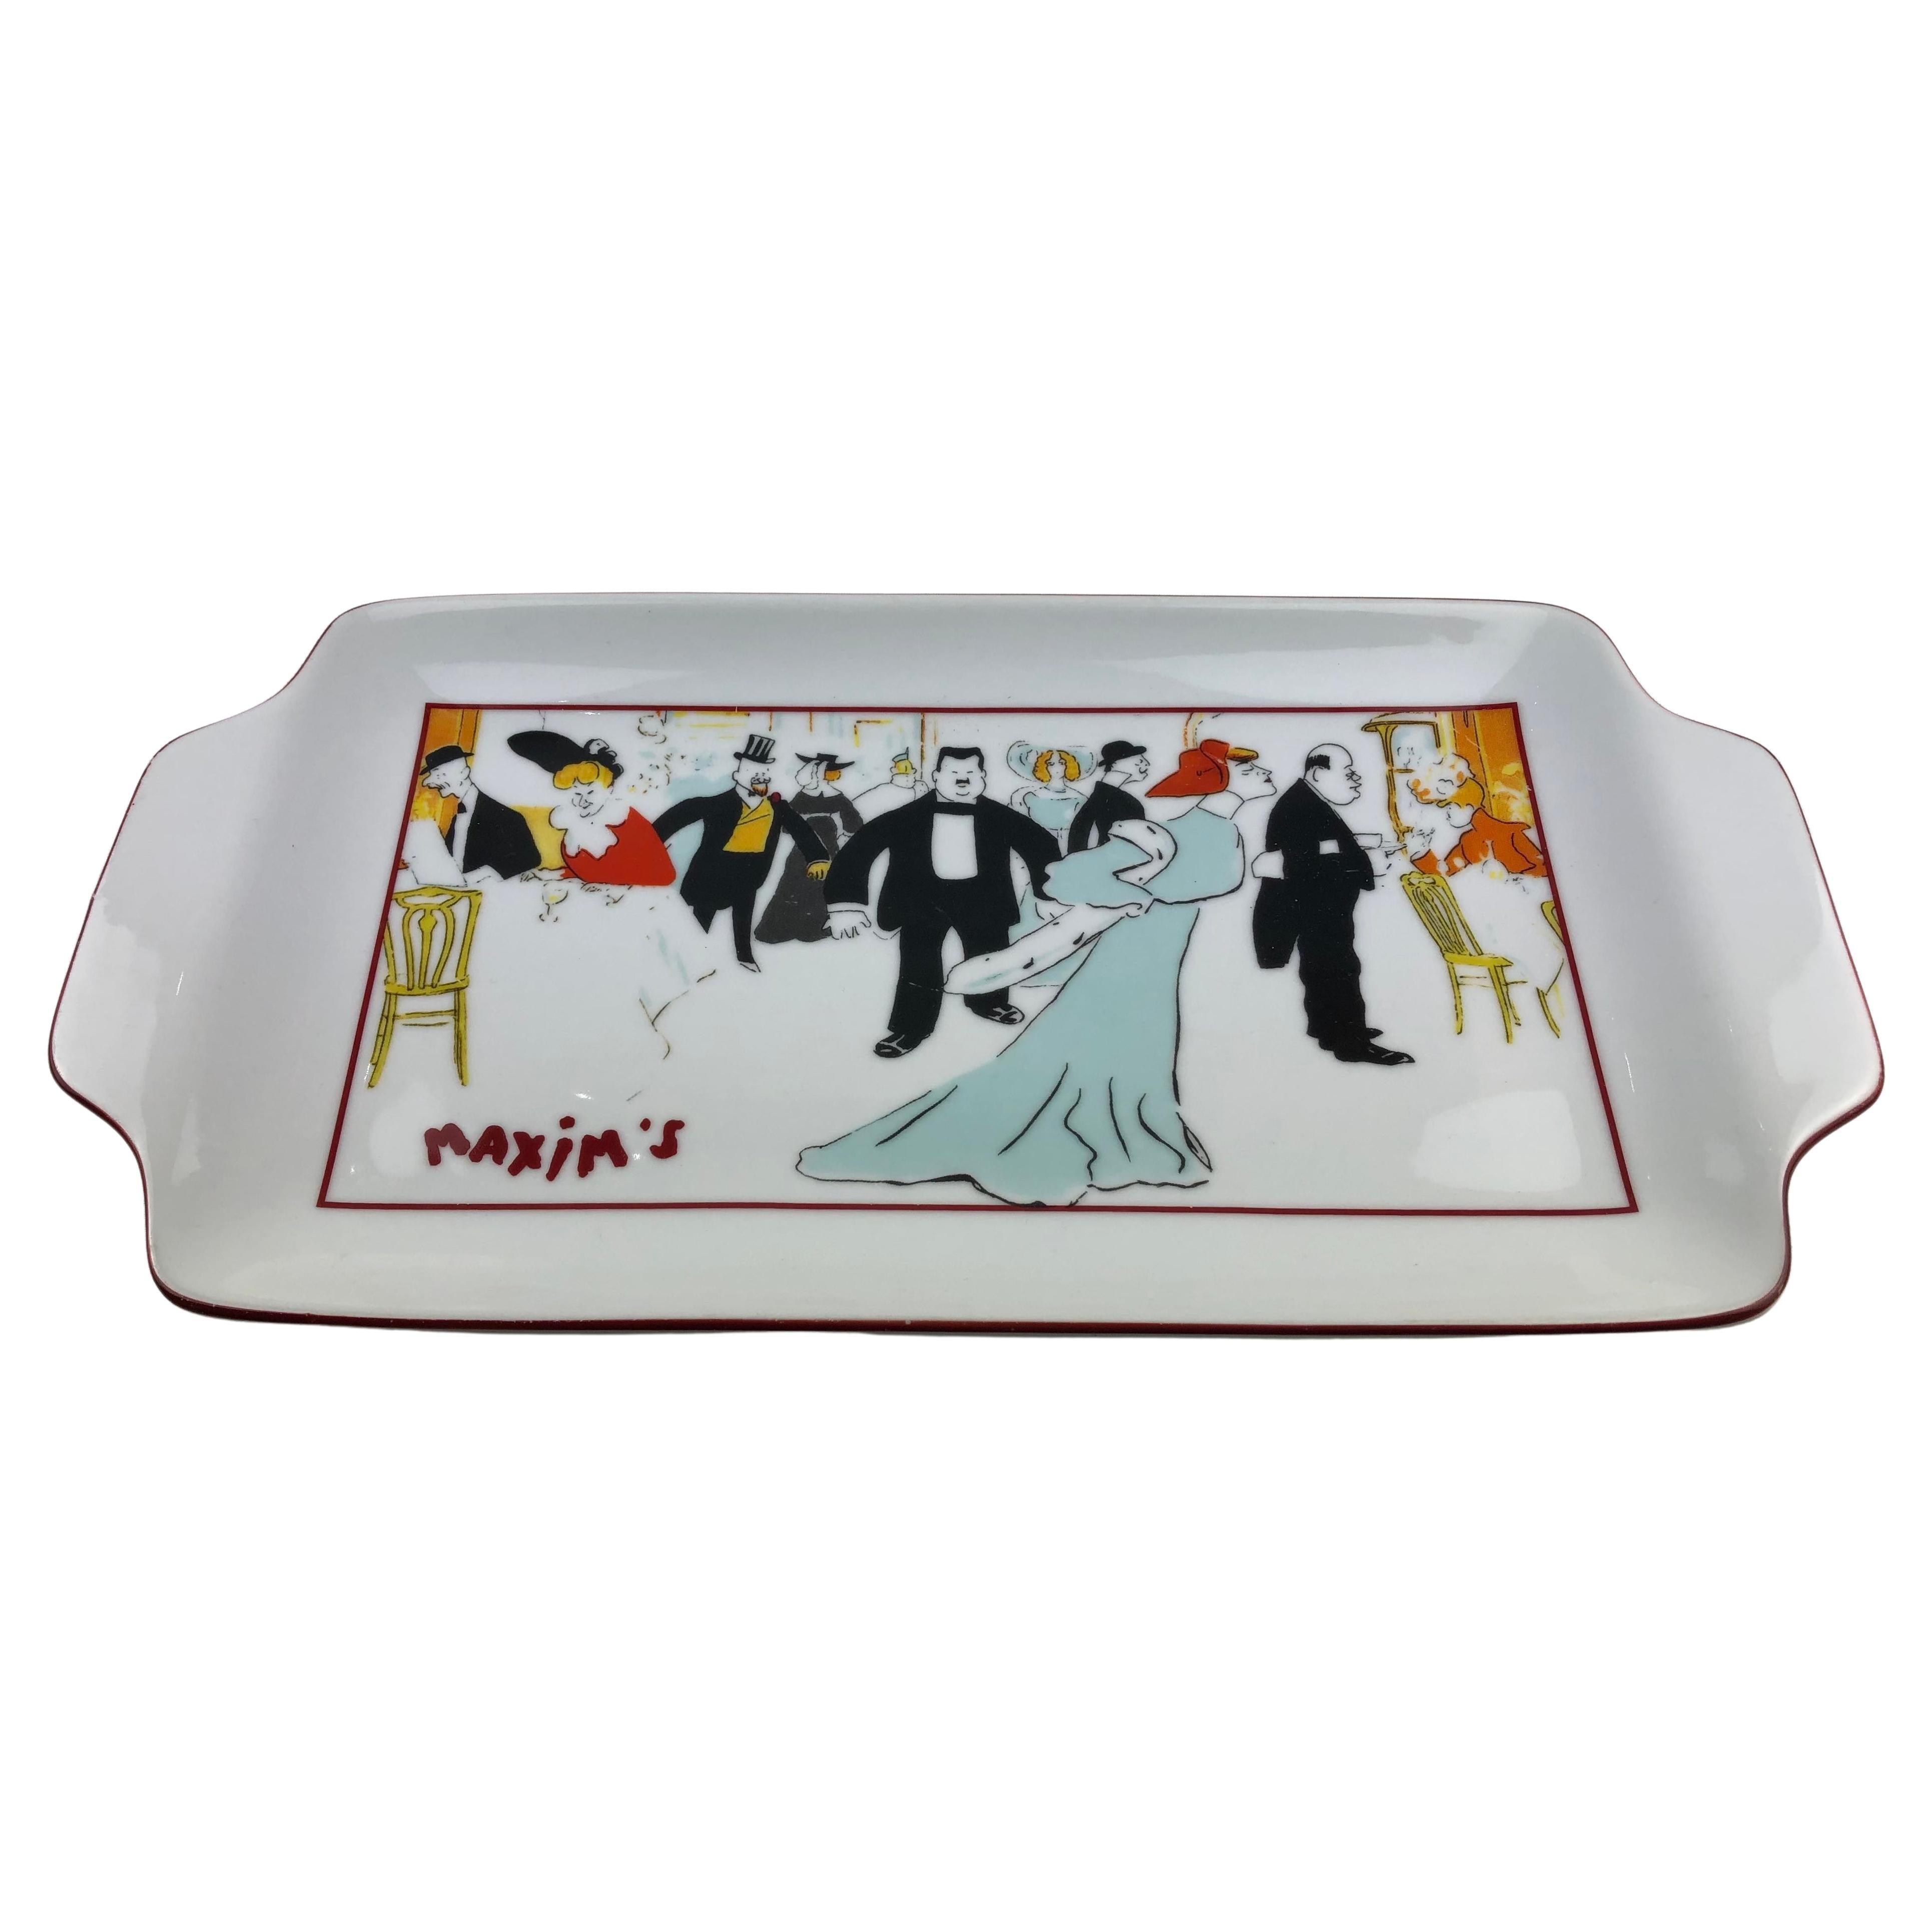 Vintage Glazed Porcelain Tray or Dish from Maxim's Paris France